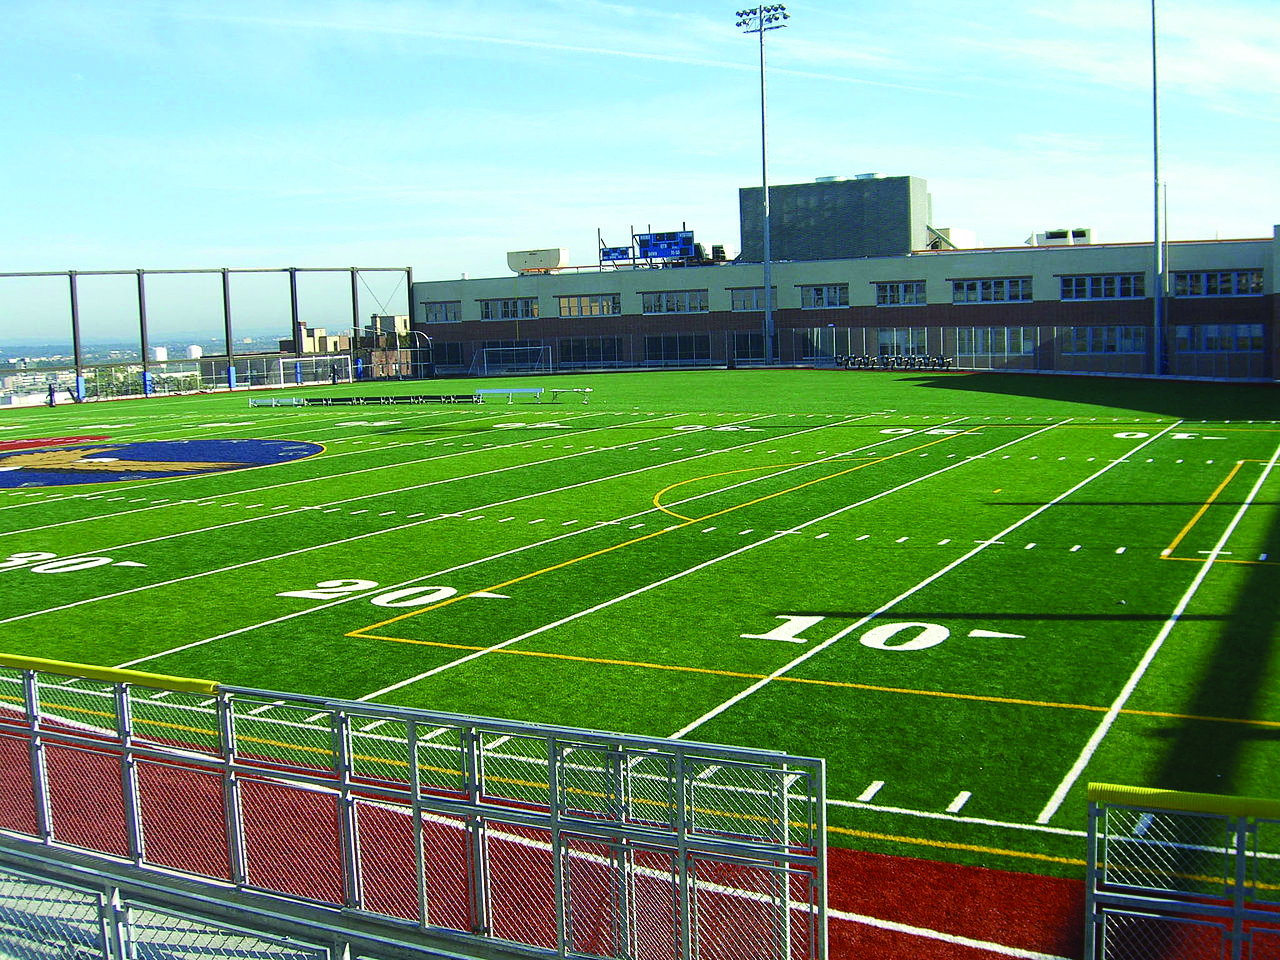 After working with the National Women’s Law Center, Union City High School made changes to its athletic facilities to allow more access for girls teams, creating a more equitable sporting experience on campus. Photo credit: Union City